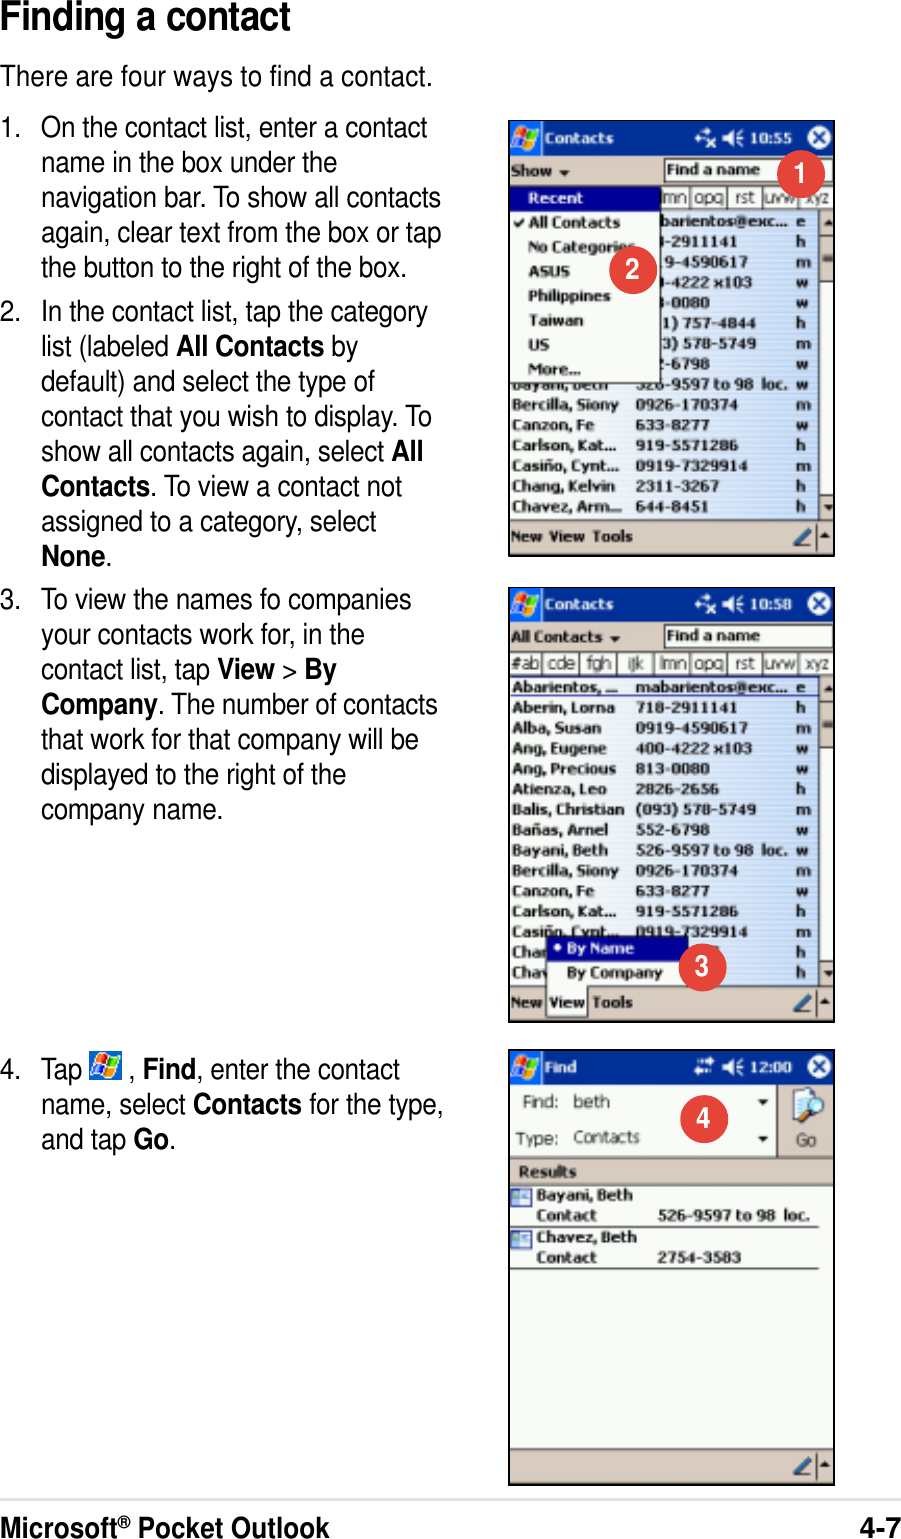 Microsoft® Pocket Outlook4-7Finding a contactThere are four ways to find a contact.1. On the contact list, enter a contactname in the box under thenavigation bar. To show all contactsagain, clear text from the box or tapthe button to the right of the box.2. In the contact list, tap the categorylist (labeled All Contacts bydefault) and select the type ofcontact that you wish to display. Toshow all contacts again, select AllContacts. To view a contact notassigned to a category, selectNone.3. To view the names fo companiesyour contacts work for, in thecontact list, tap View &gt;ByCompany. The number of contactsthat work for that company will bedisplayed to the right of thecompany name.4. Tap   , Find, enter the contactname, select Contacts for the type,and tap Go.1234